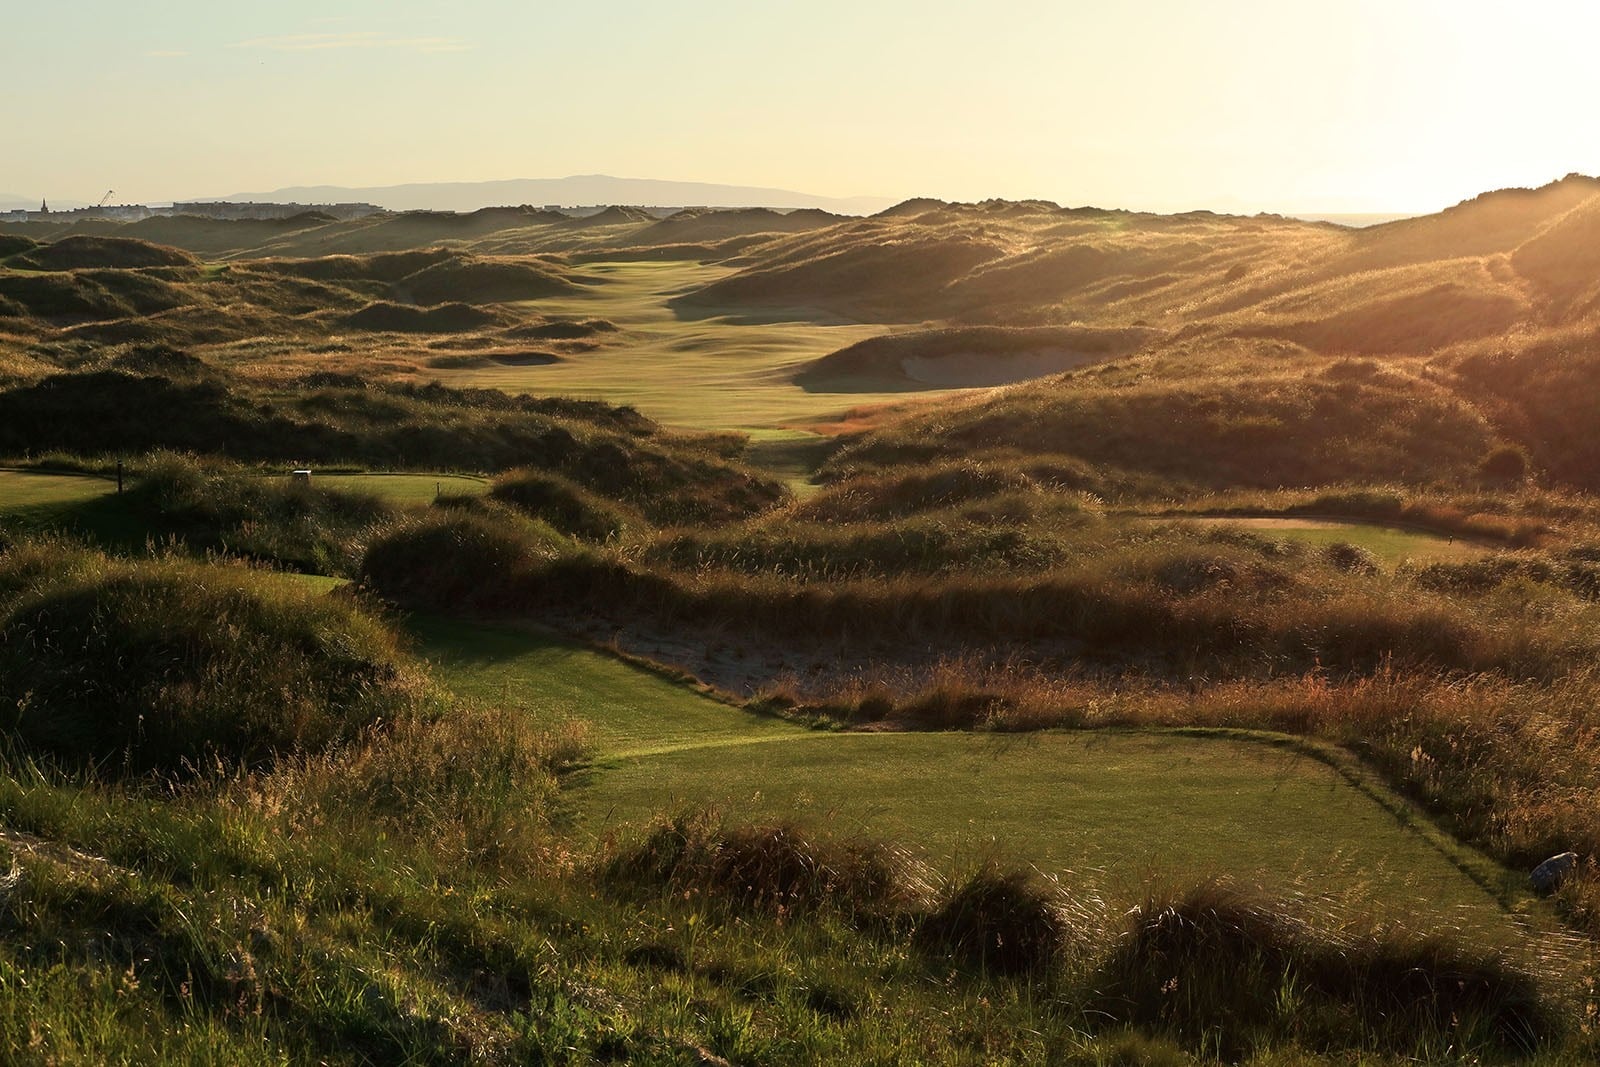 Image depicting the Valley Course at Portrush at sunset